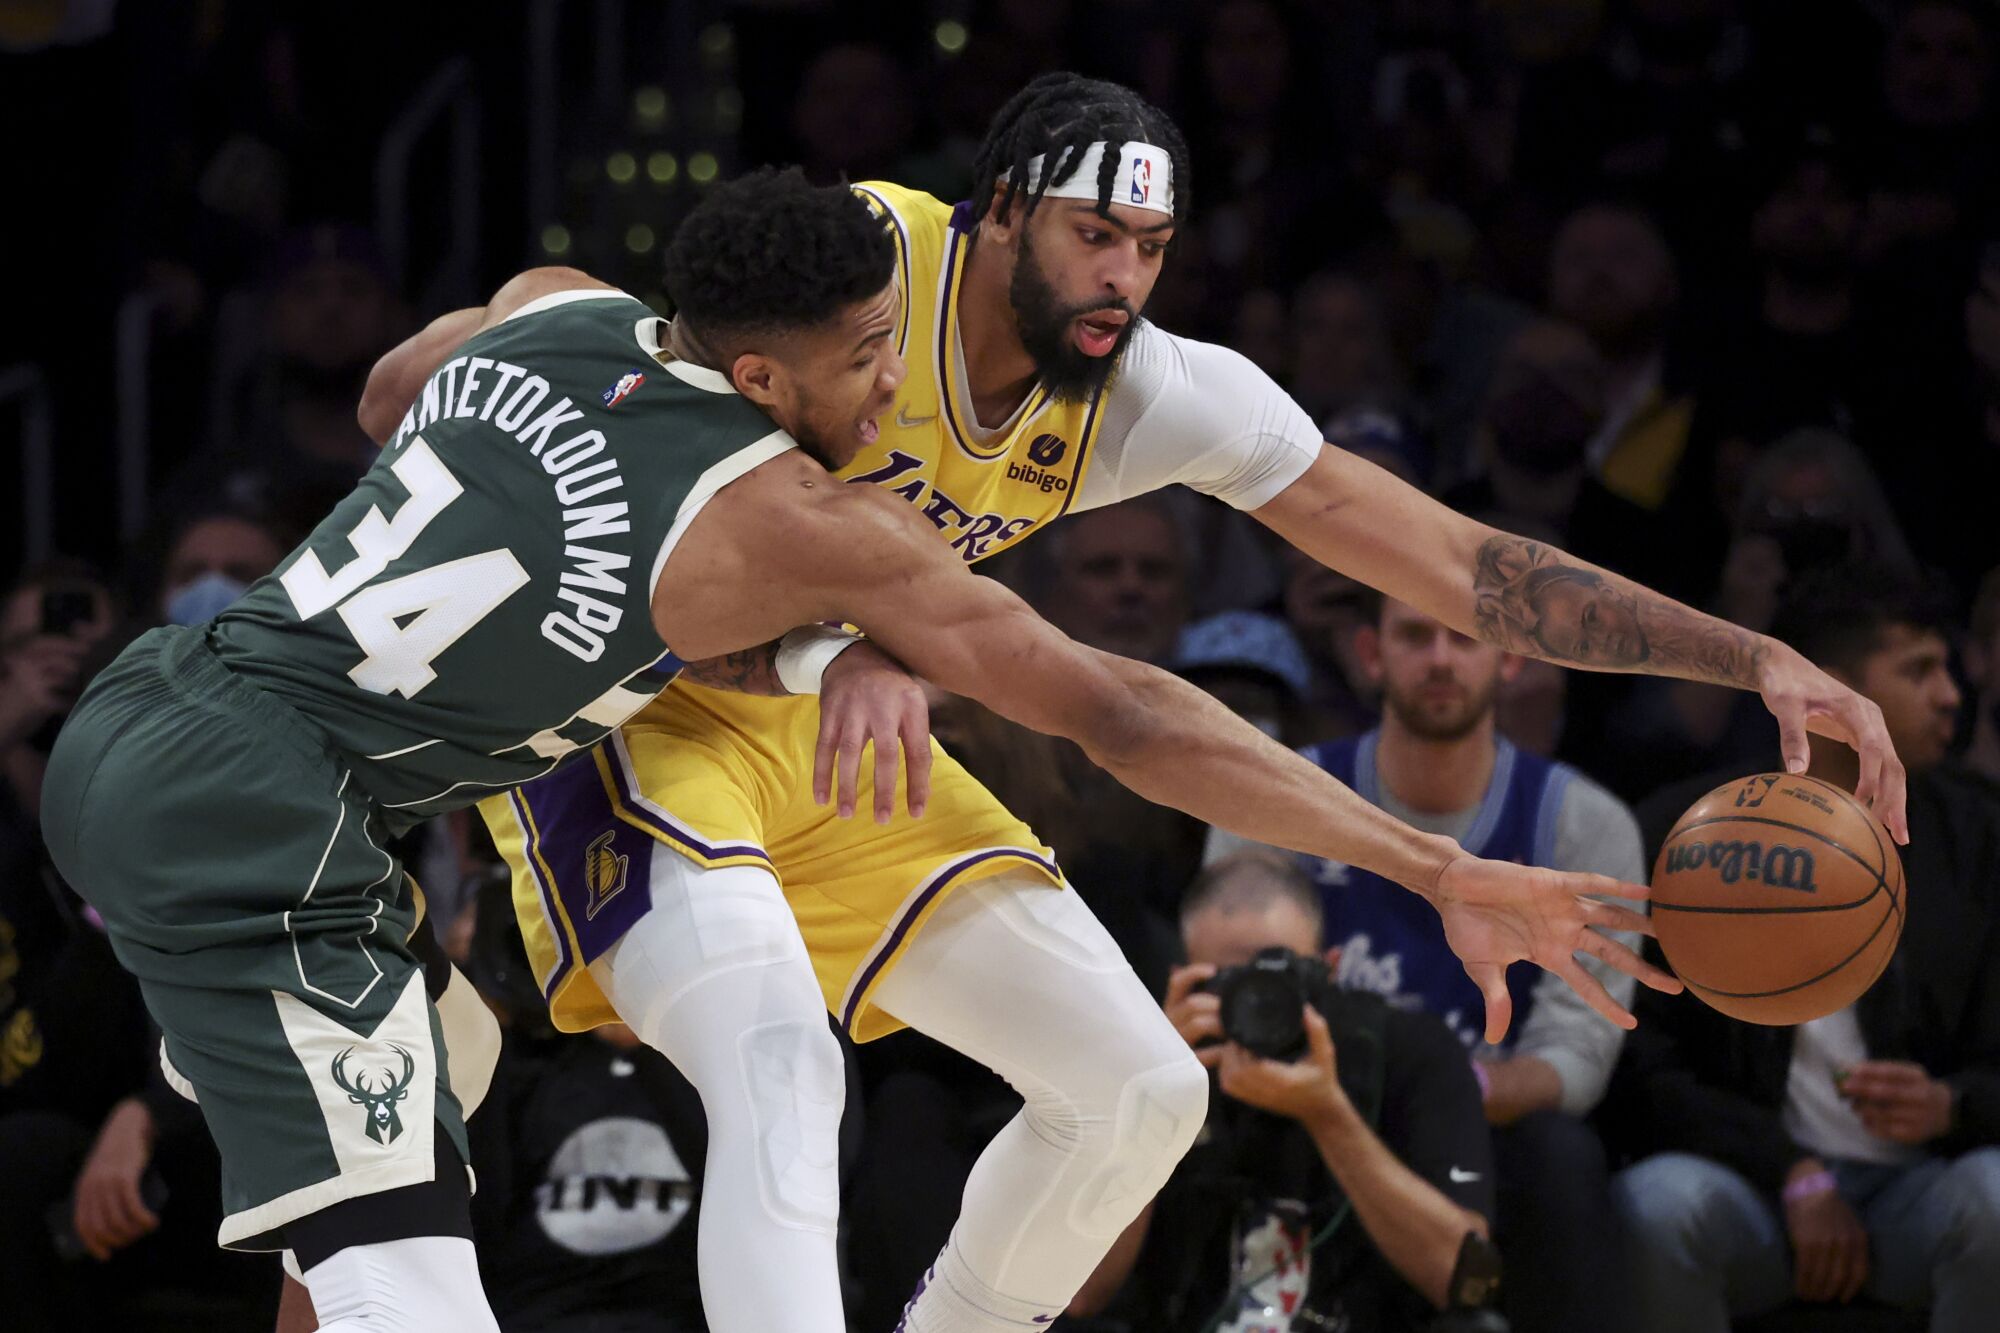 Lakers forward turns his side toward Bucks forward Giannis Antetokounmpo, who is reaching to try to steal the ball.